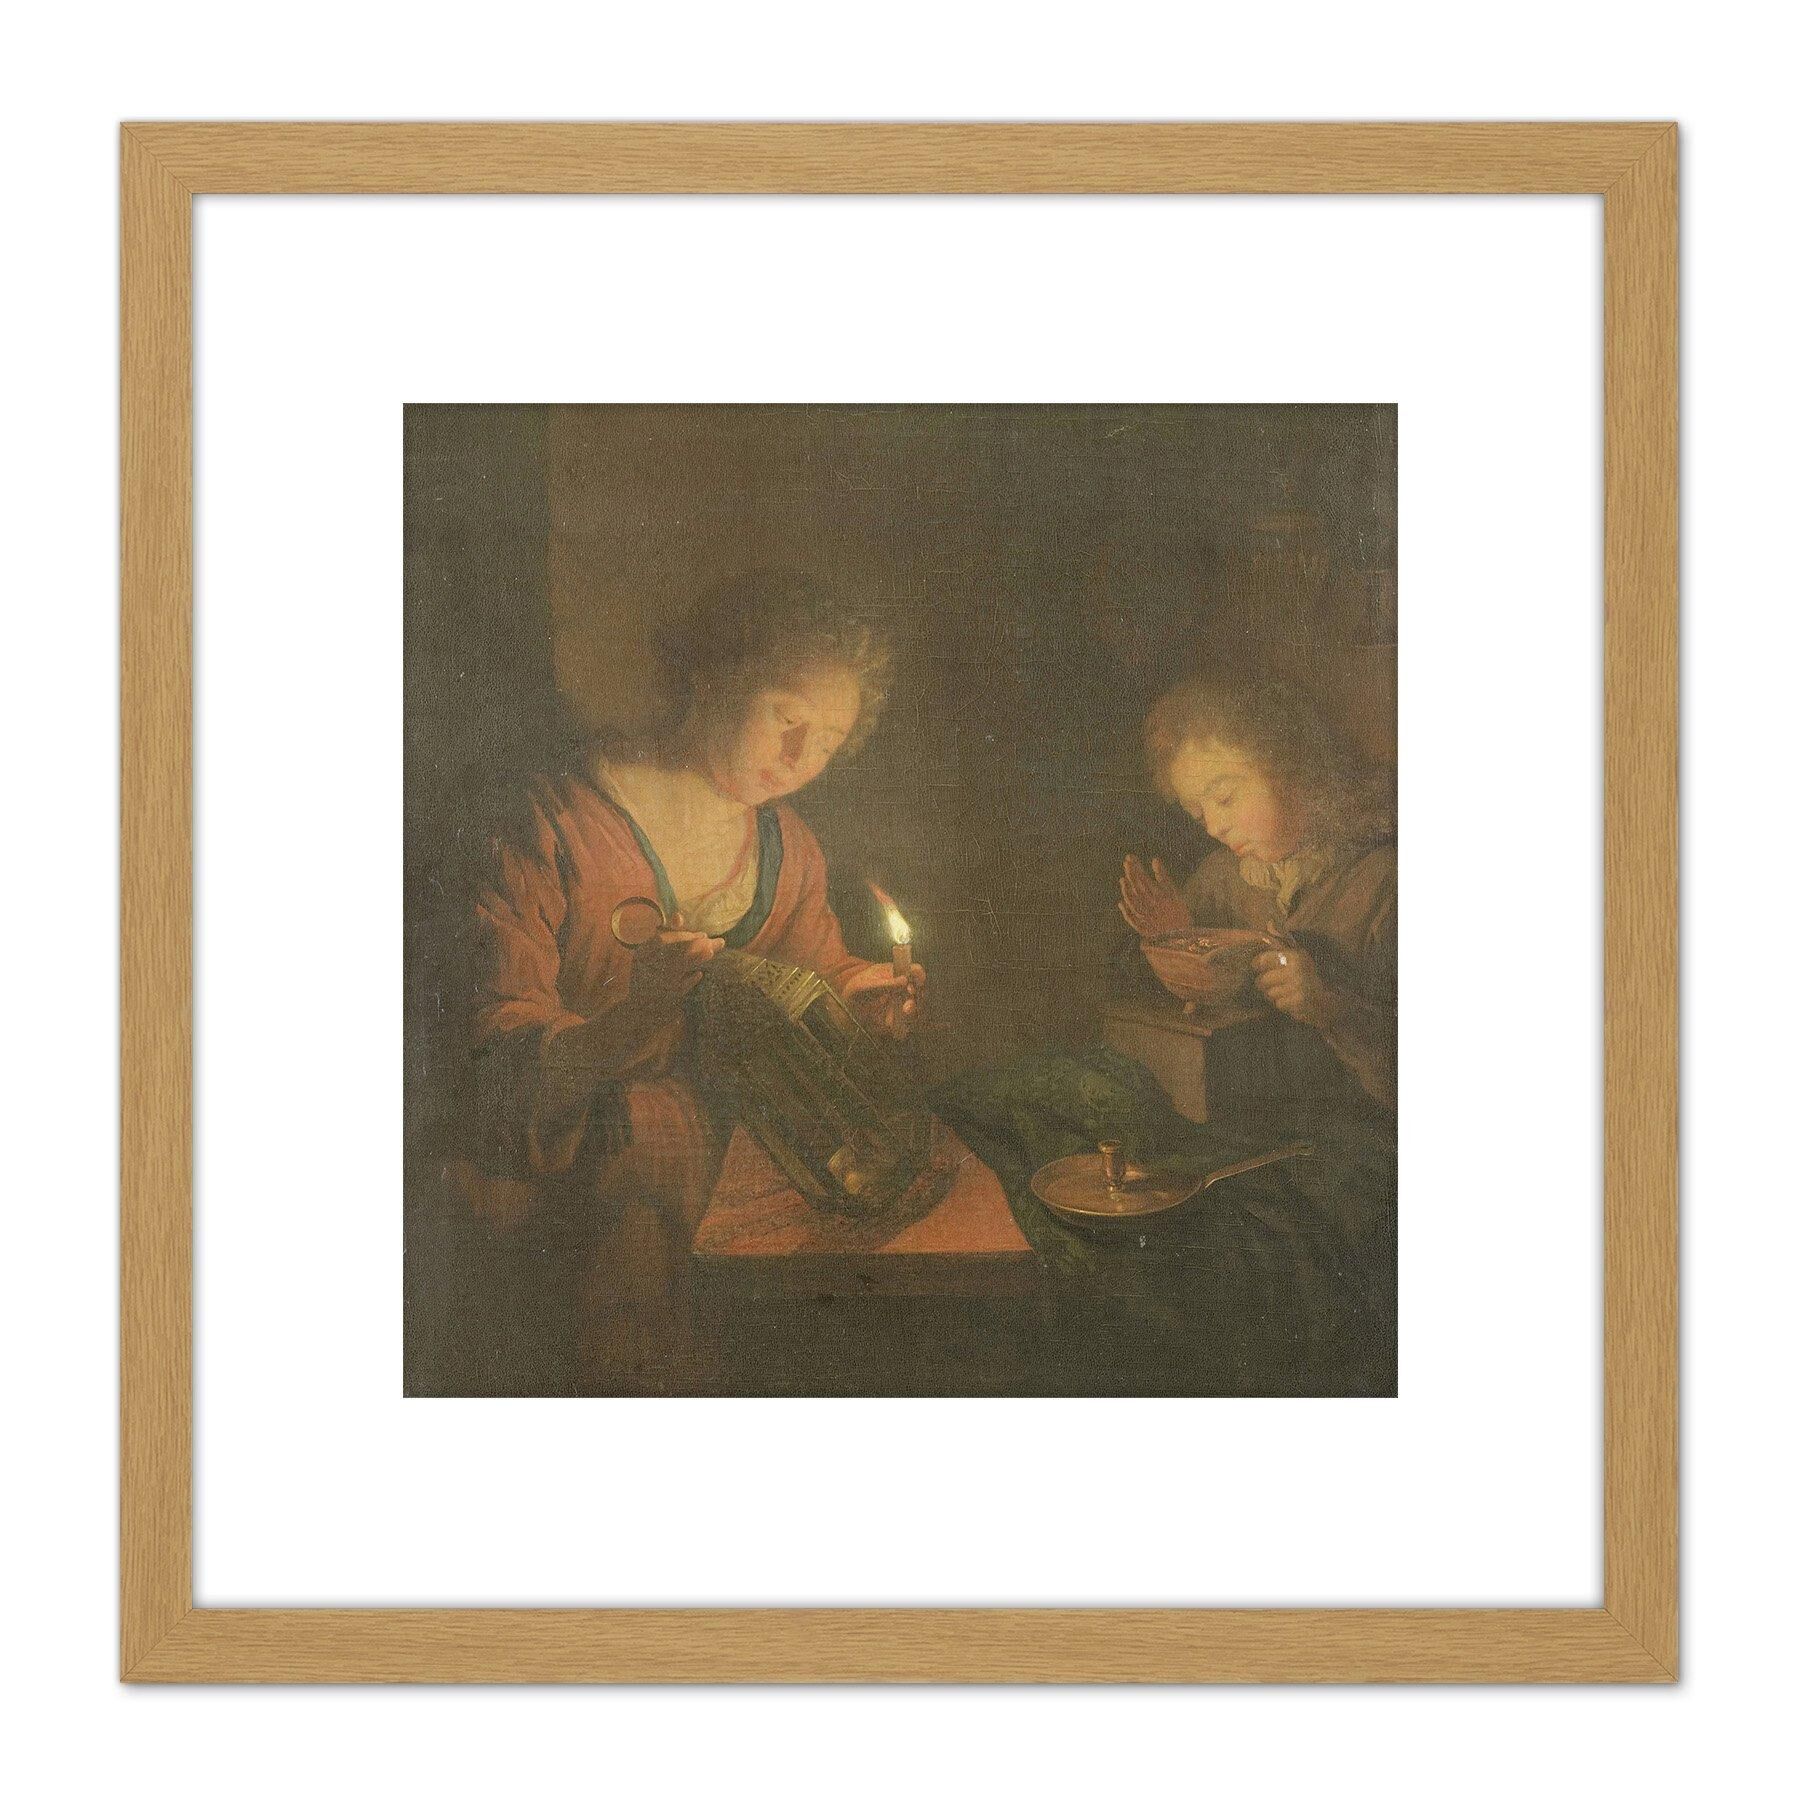 Artery8 Schalcken Fire And Light Candle Coals Painting 8X8 Inch Square Wooden Framed Wall Art Print Picture with Mount